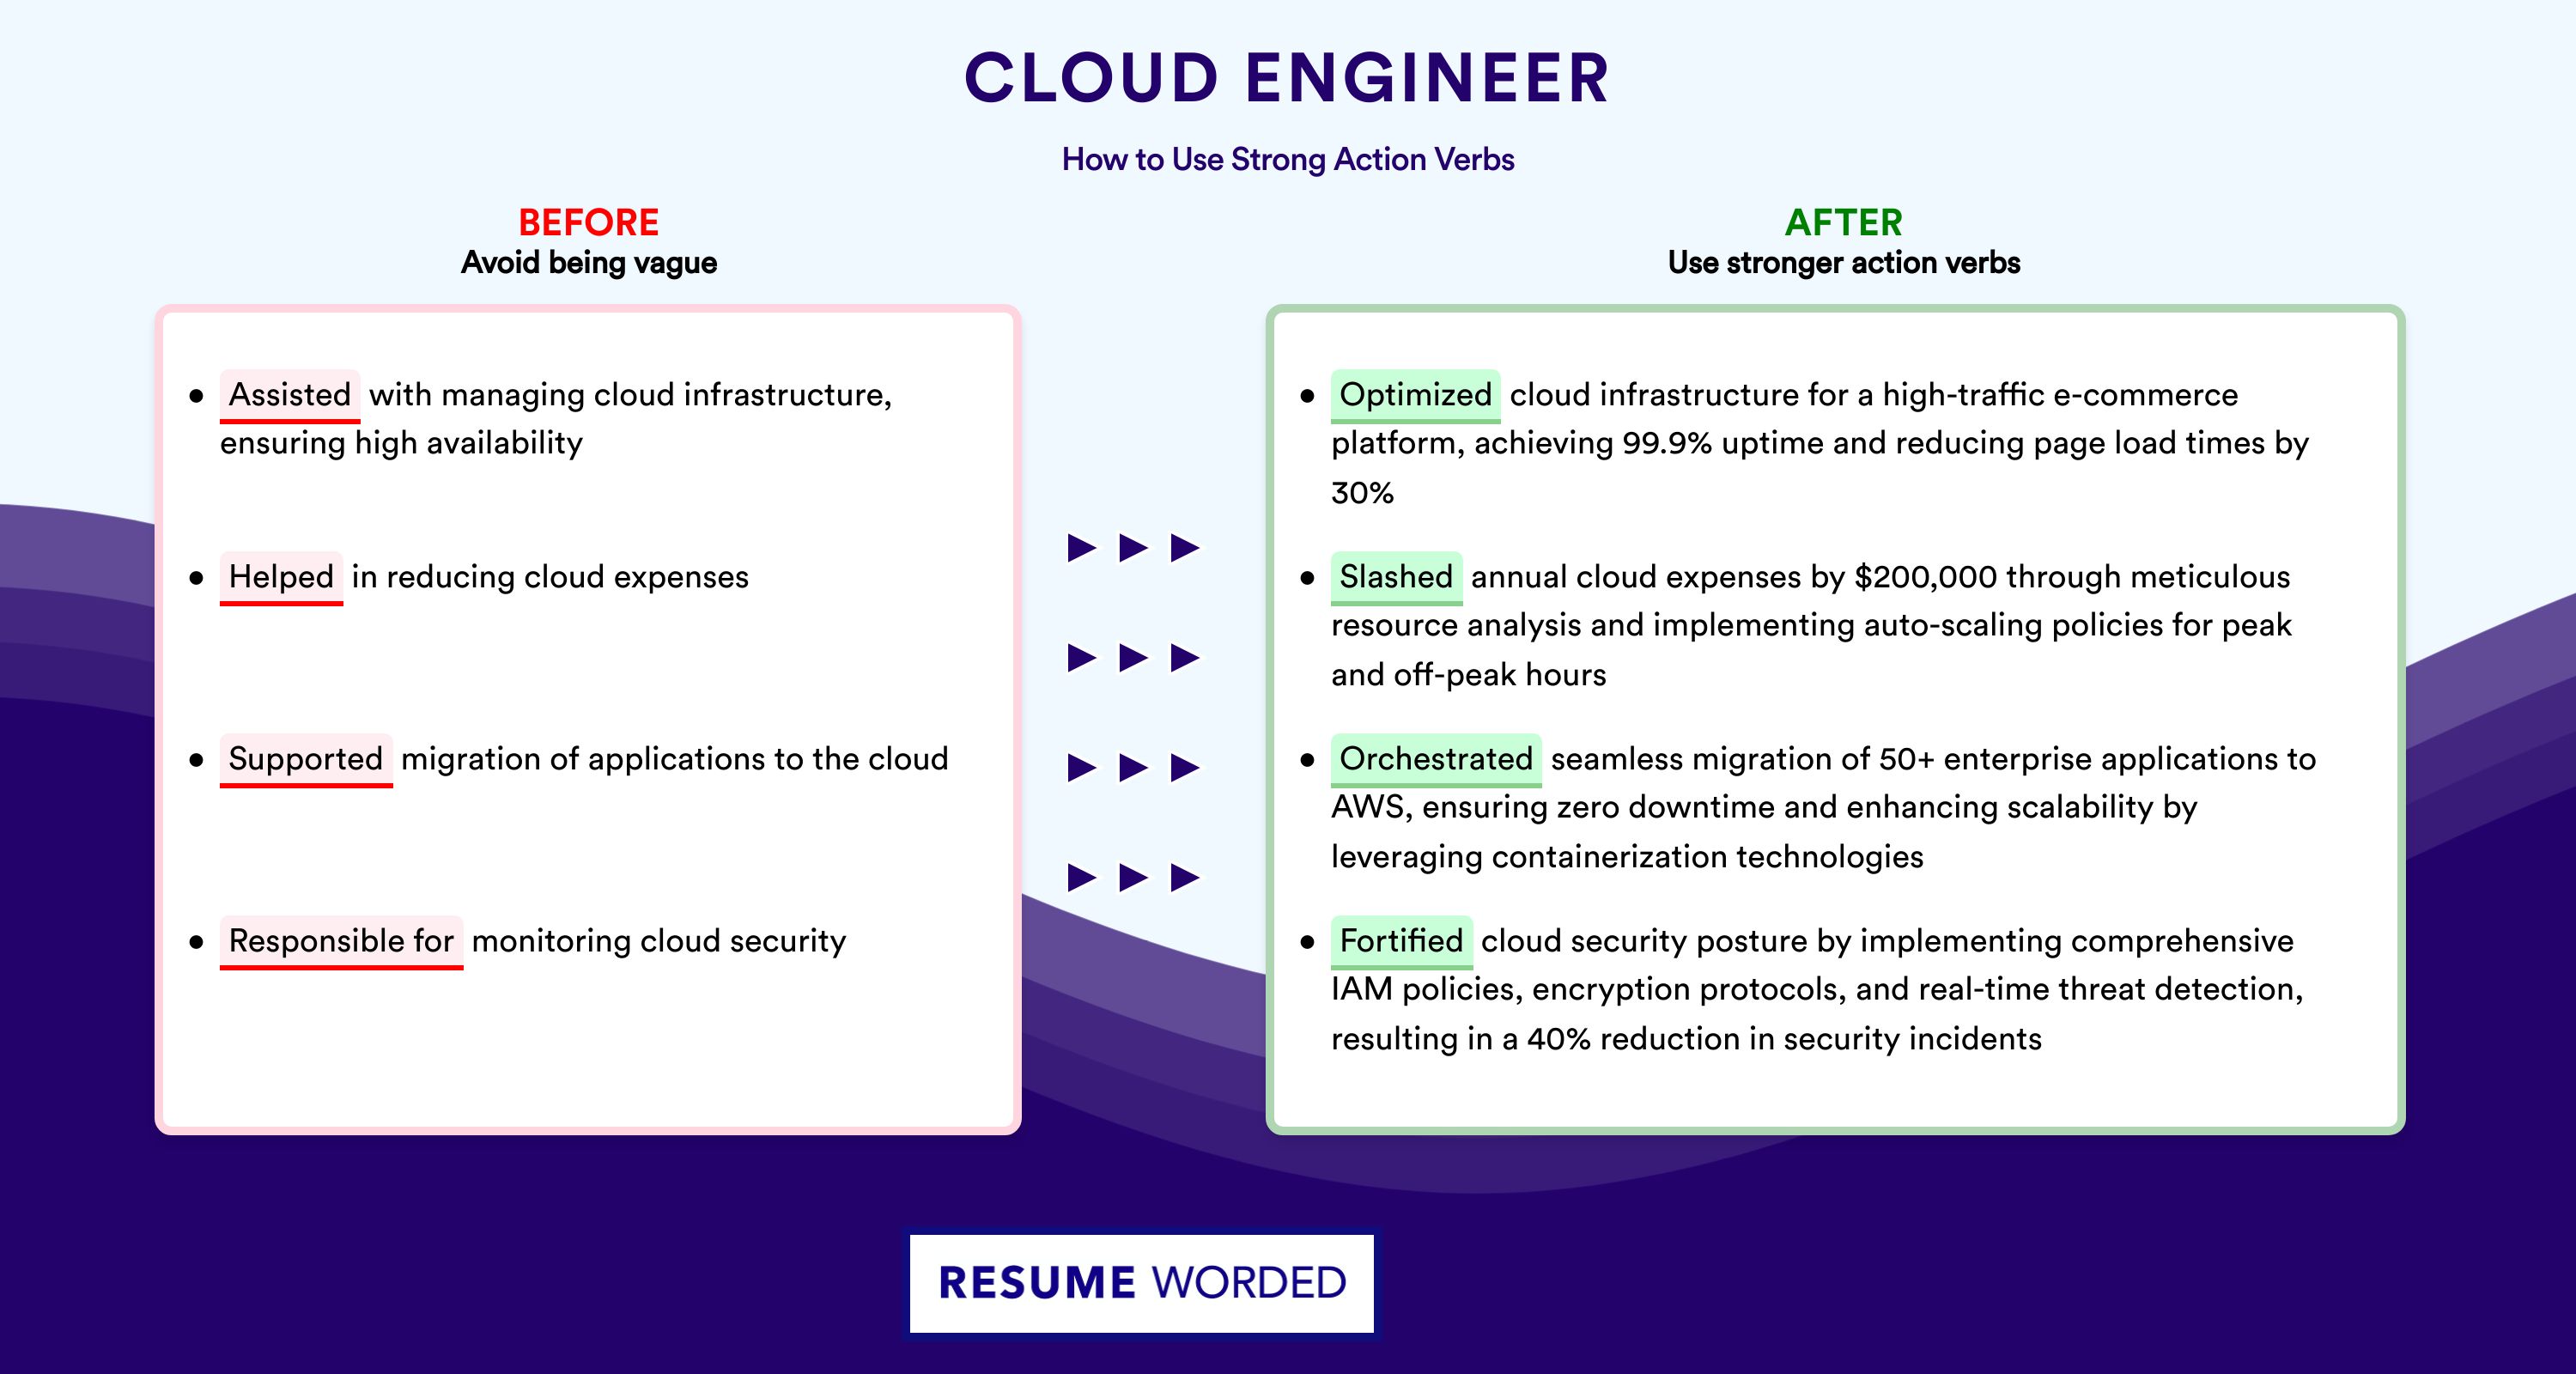 Action Verbs for Cloud Engineer